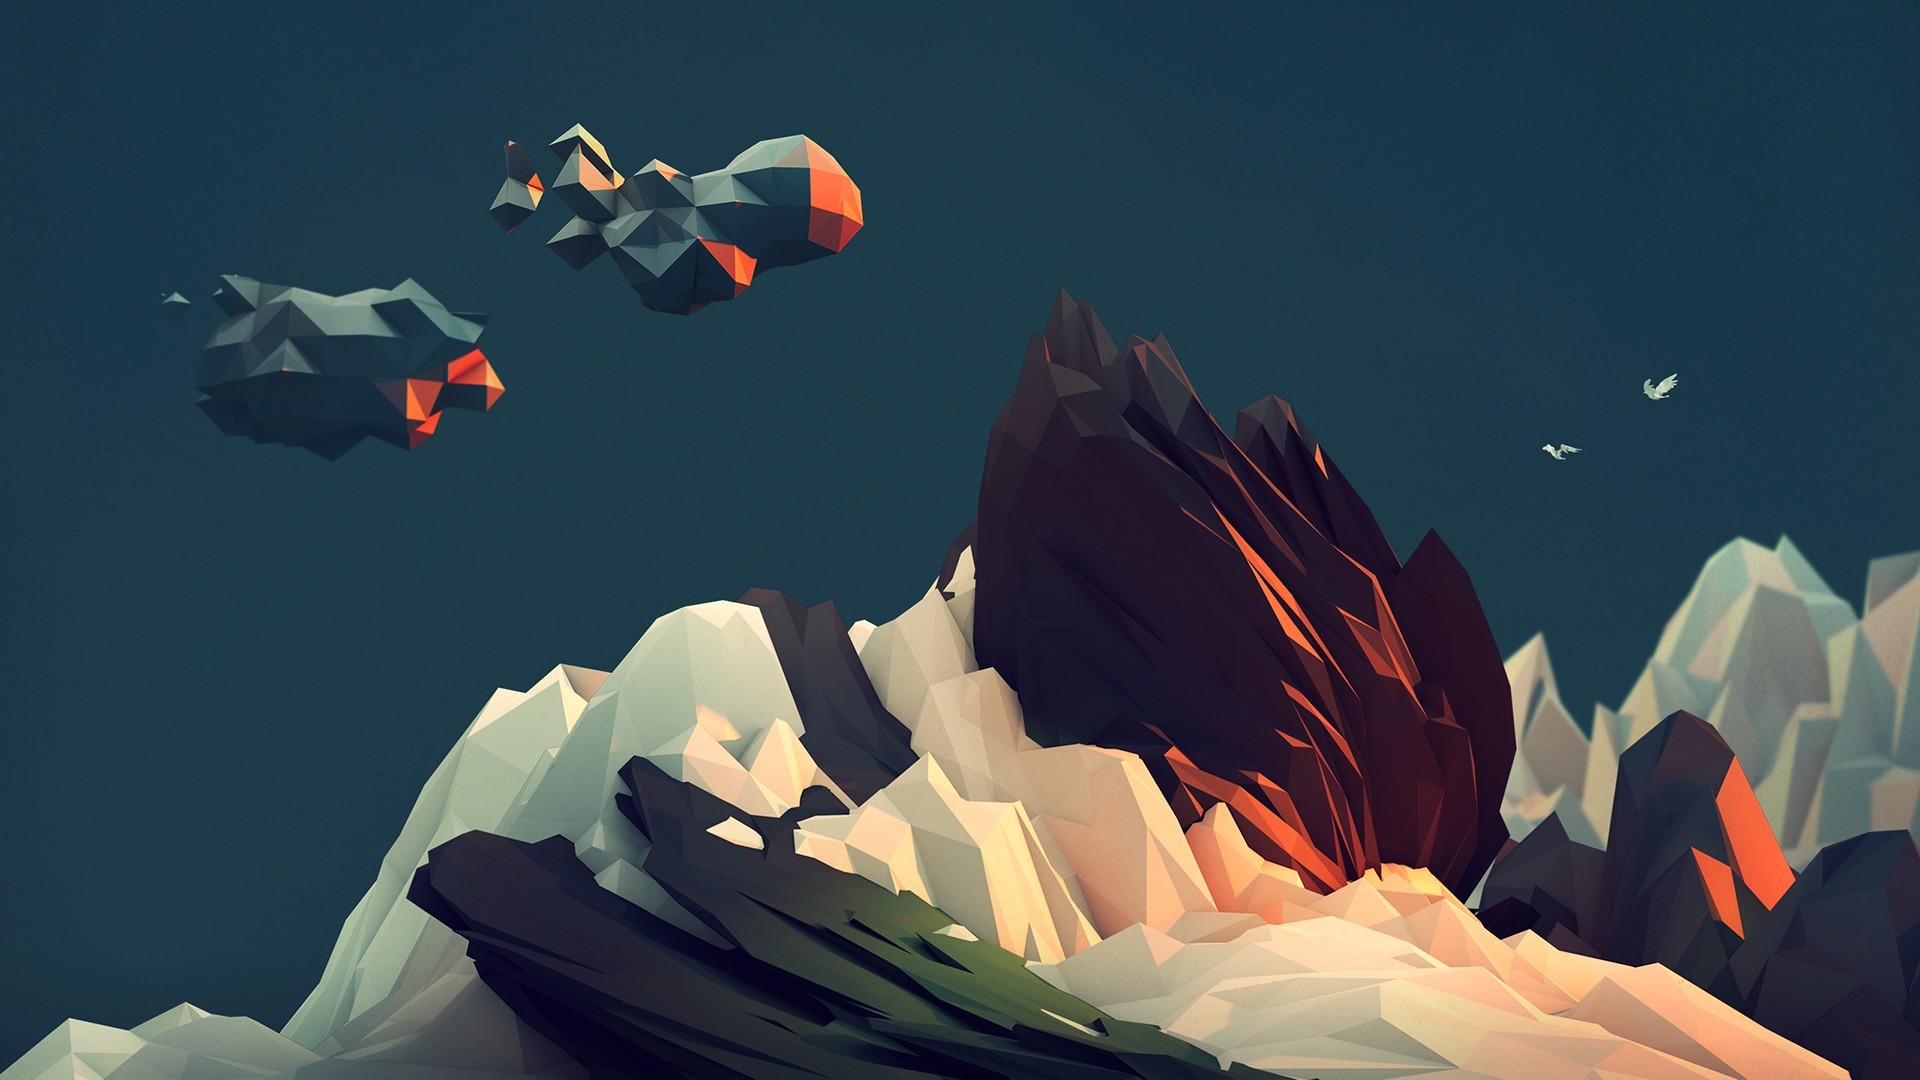 Clouds Mountains Trixel Low Poly Abstract Teal 3D Digital Art Render Birds 1920x1080